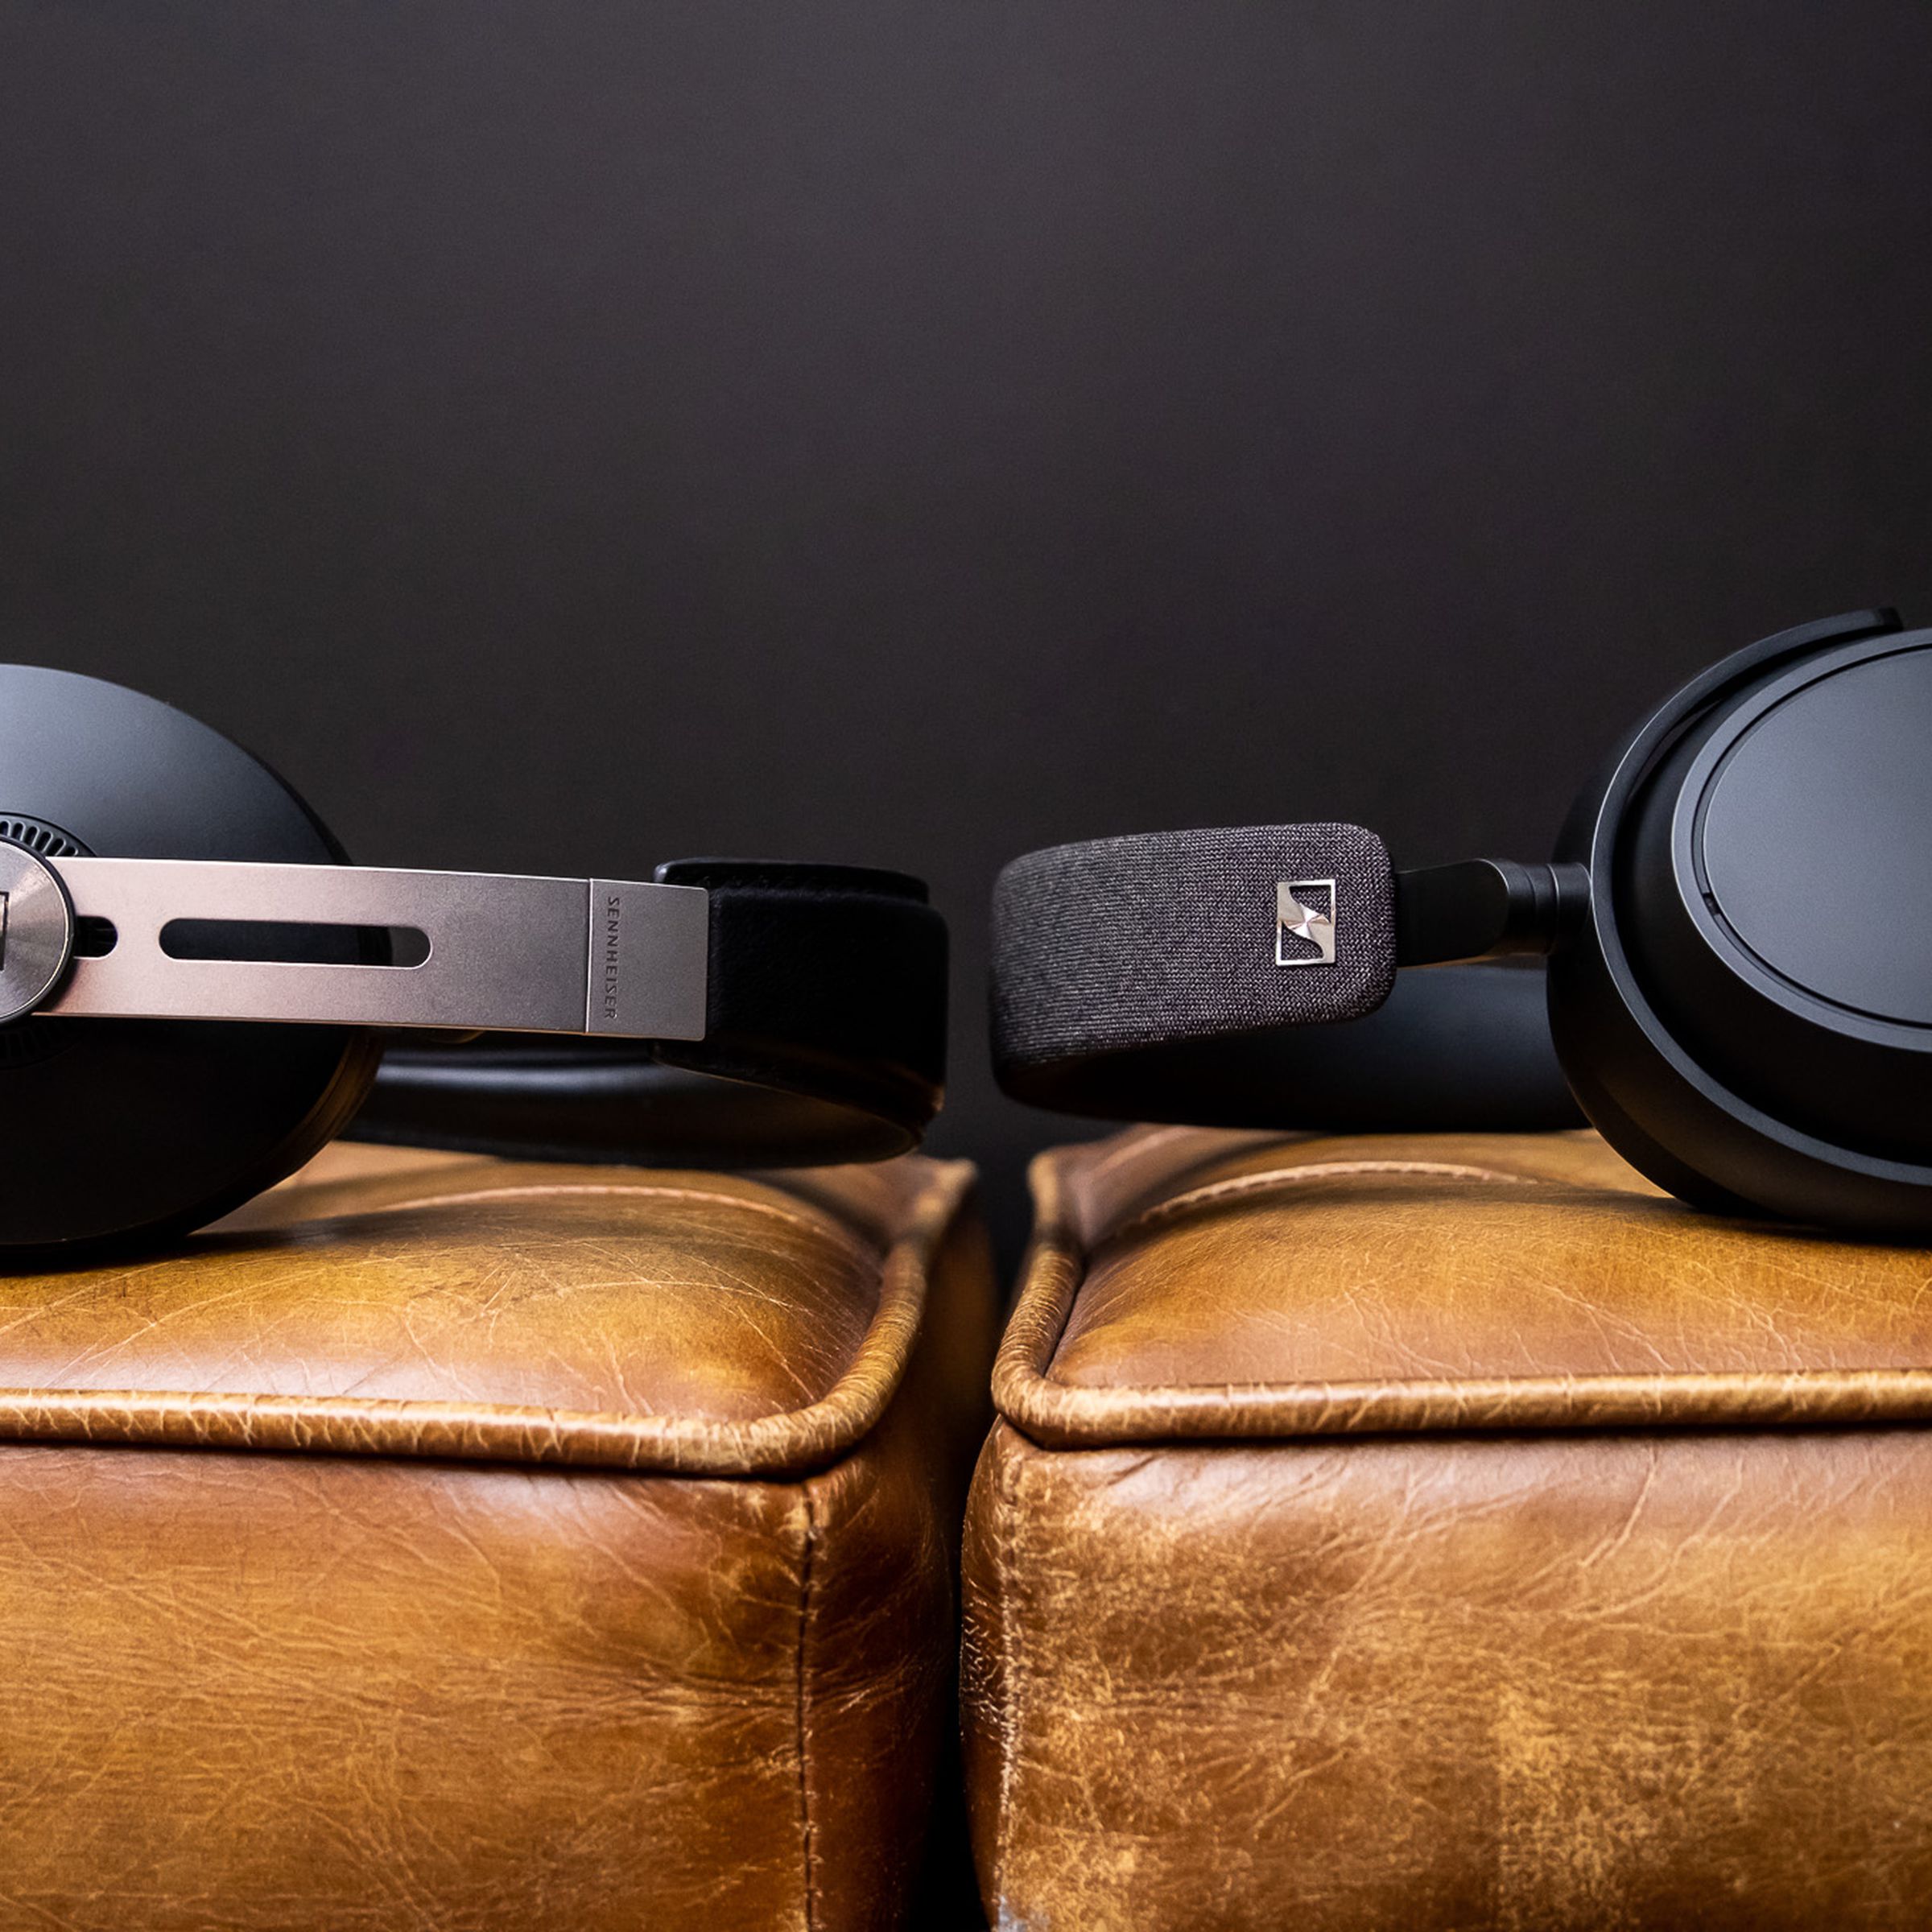 The Sennheiser Momentum 3 and Sennheiser Momentum 4 headphones facing each other while lying on a couch.